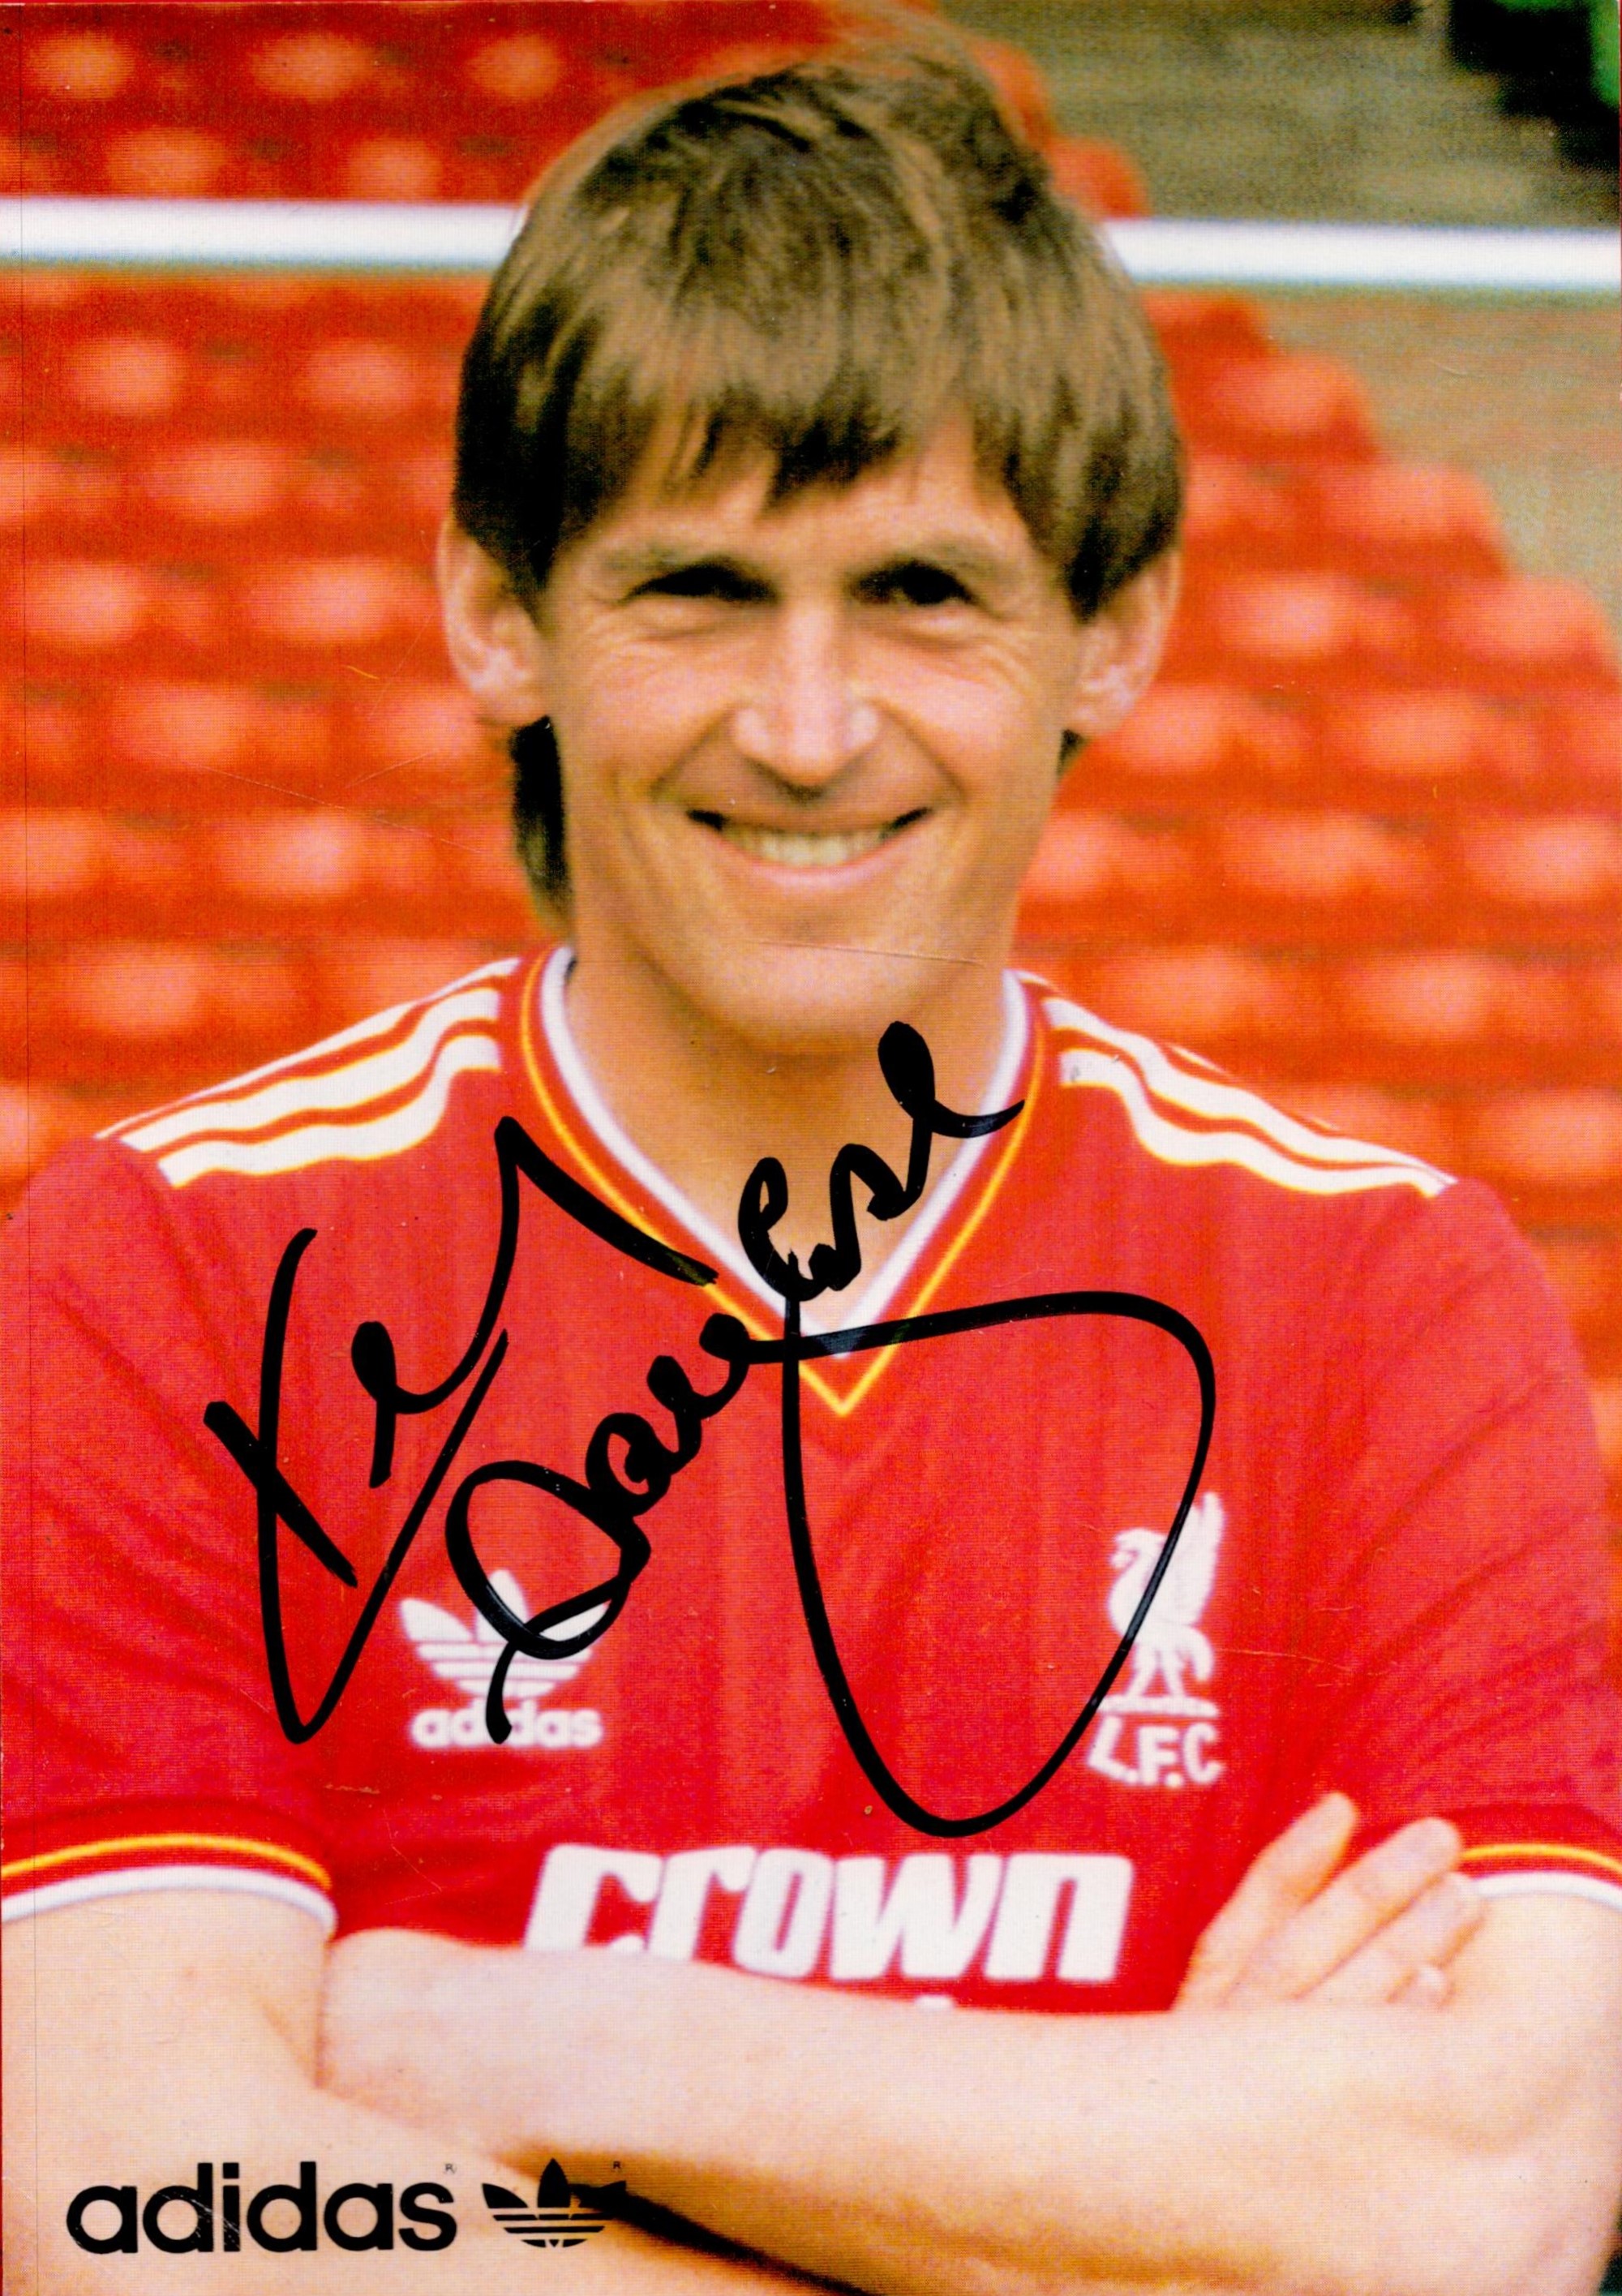 Kenny Dalglish signed 8x6 colour Adidas promo photo. Good condition. All autographs come with a